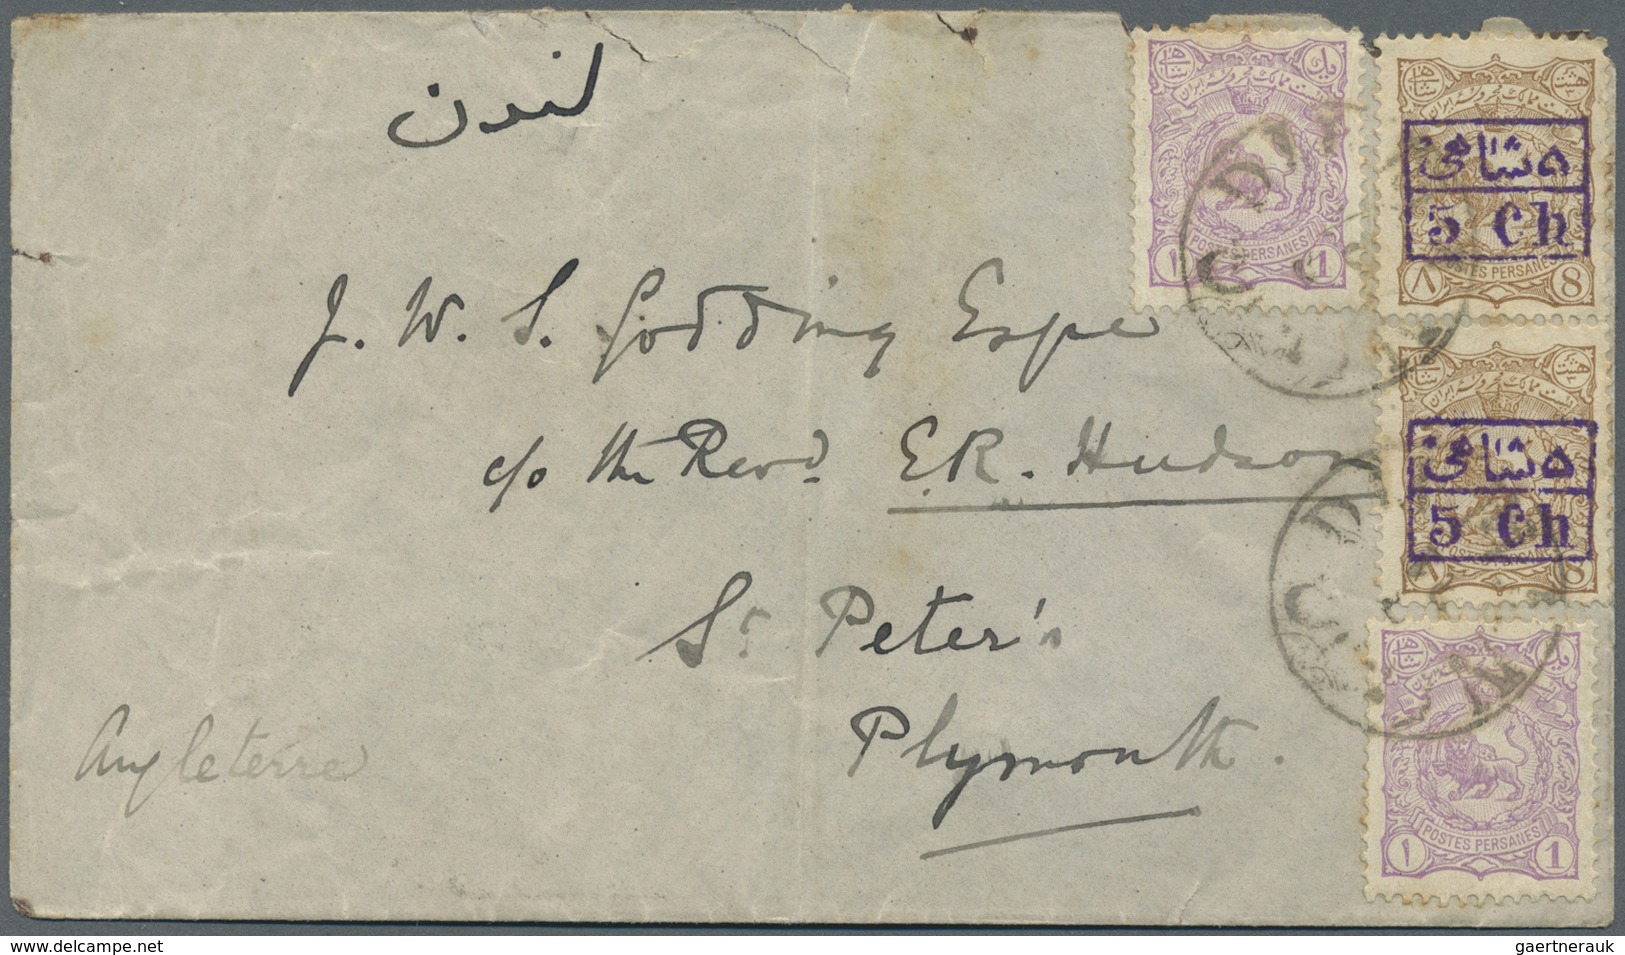 Br Iran: 1890-1910, 12 covers including registered mail, scarce cancellations Lengueboud, Djoulfa and R